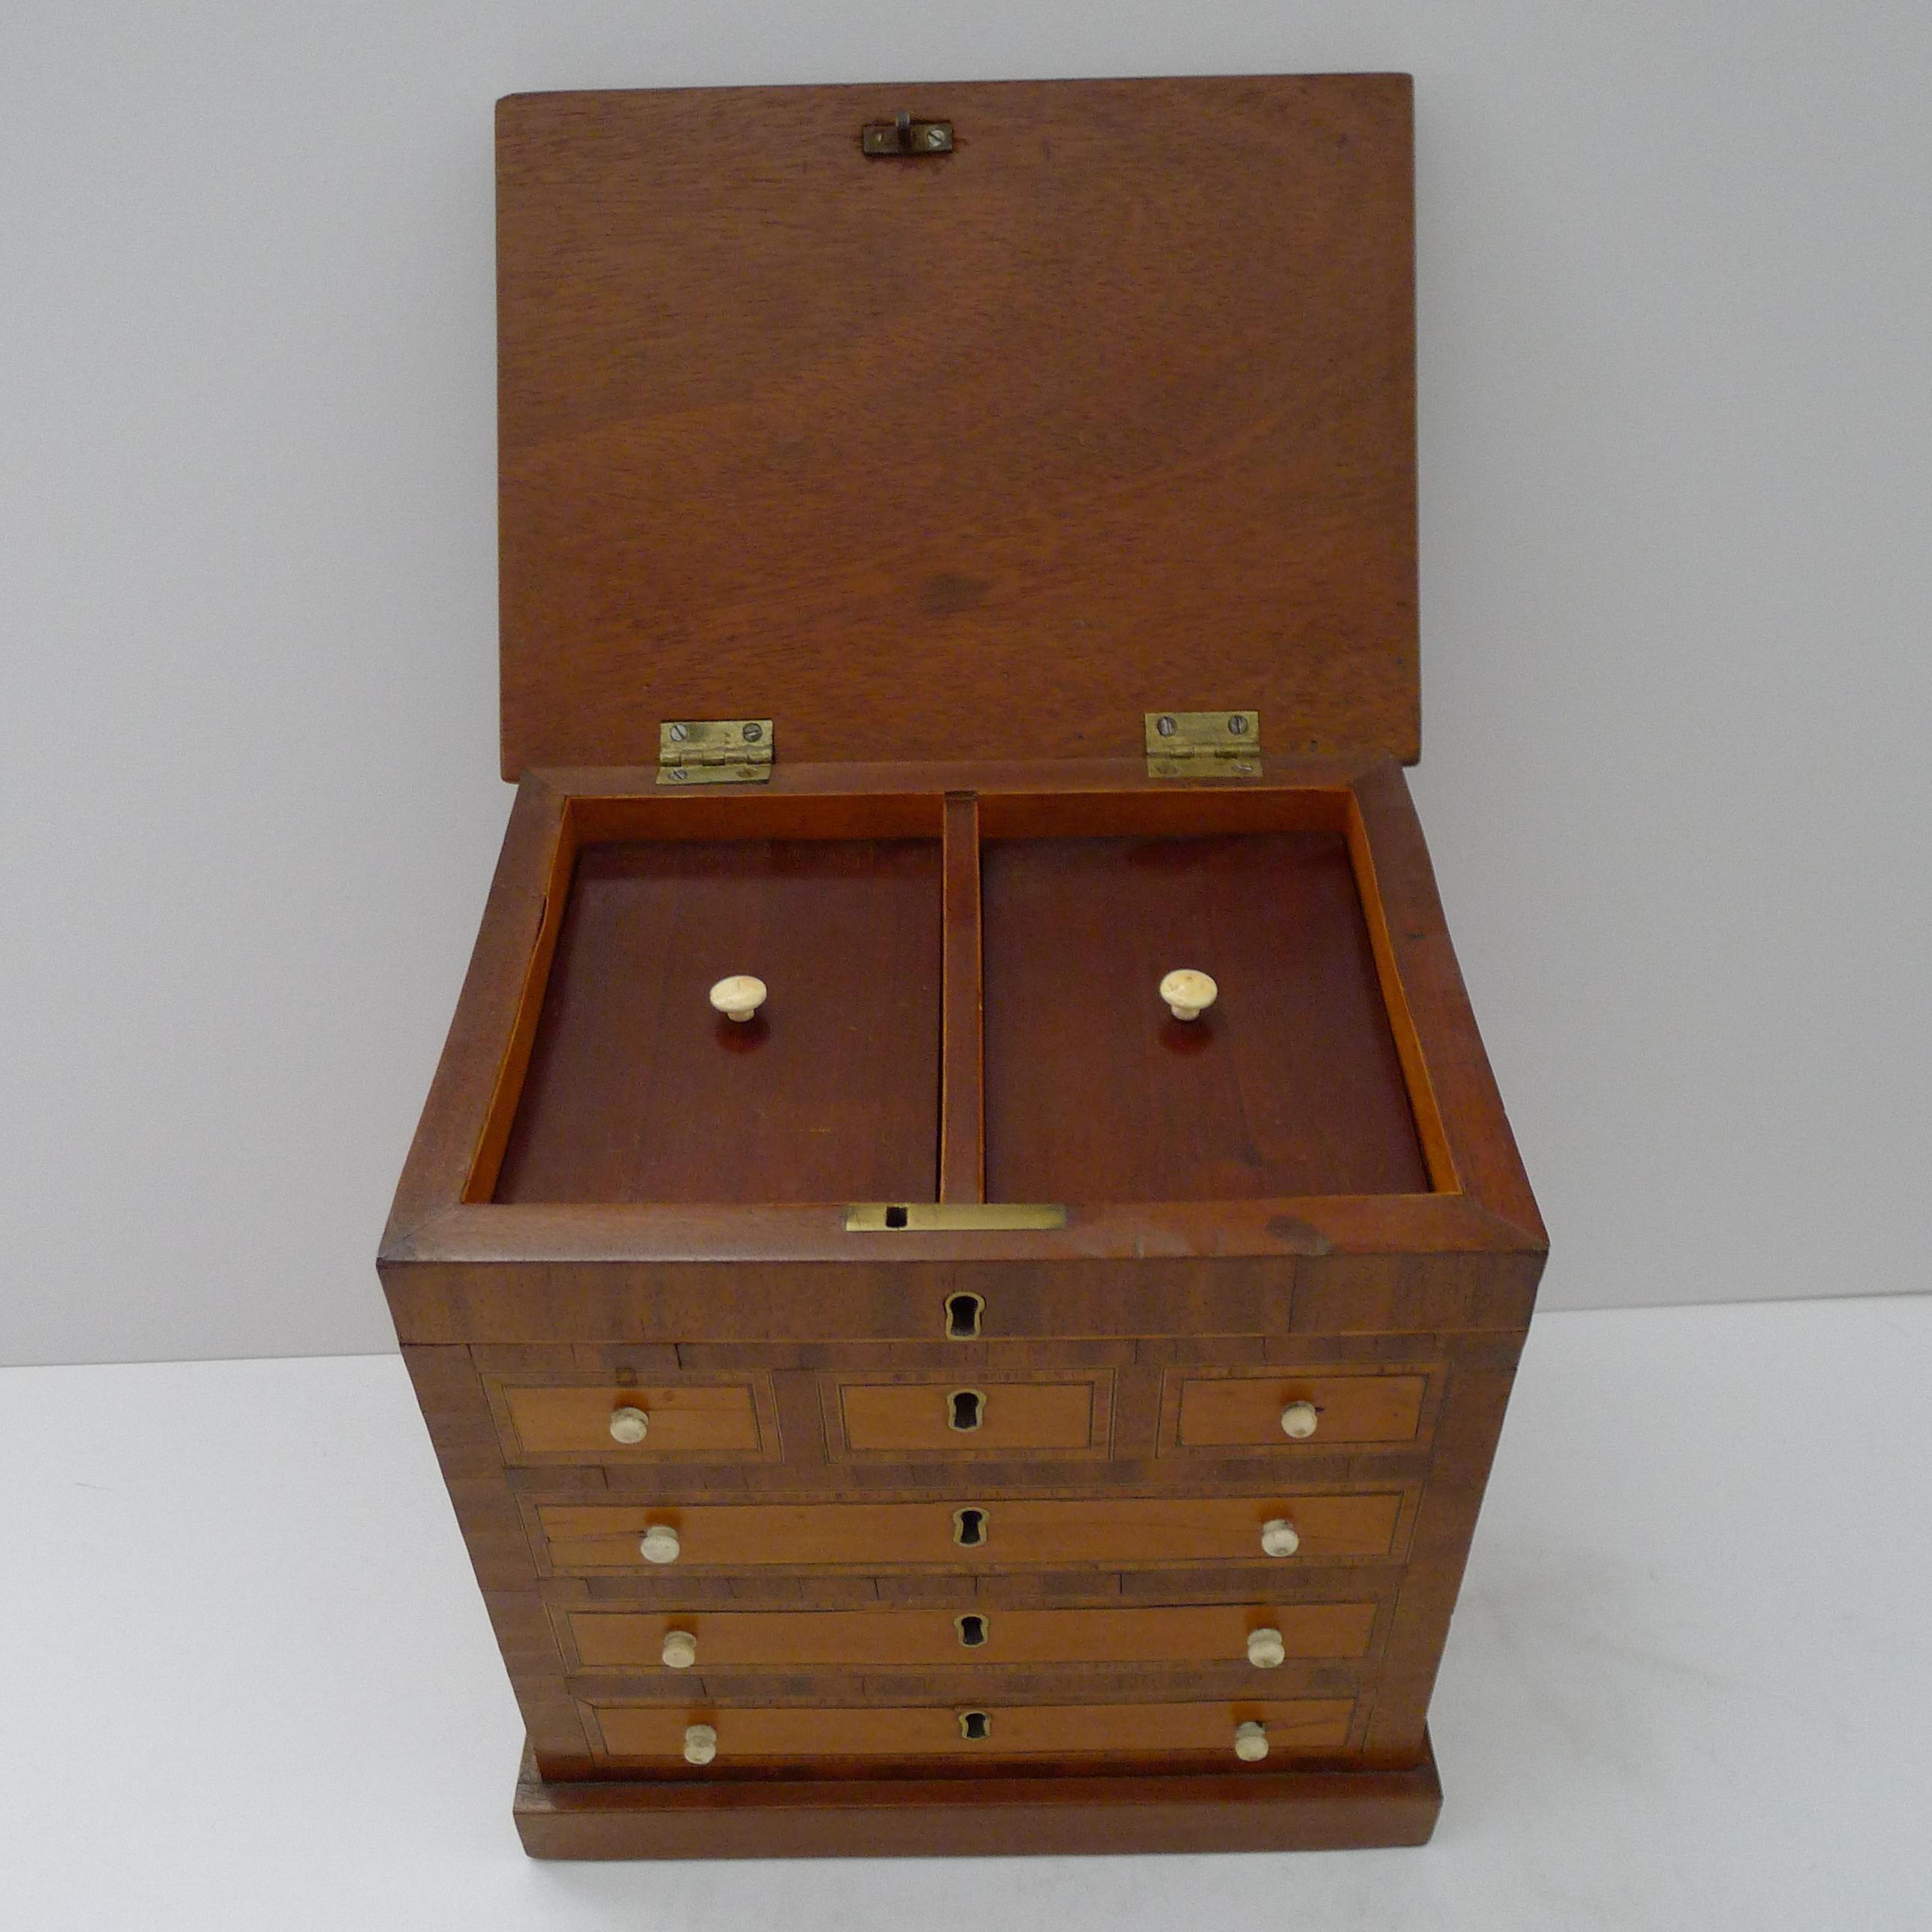 British Rare English Mahogany Tea Caddy - Form of Chest of Drawers c.1880 For Sale